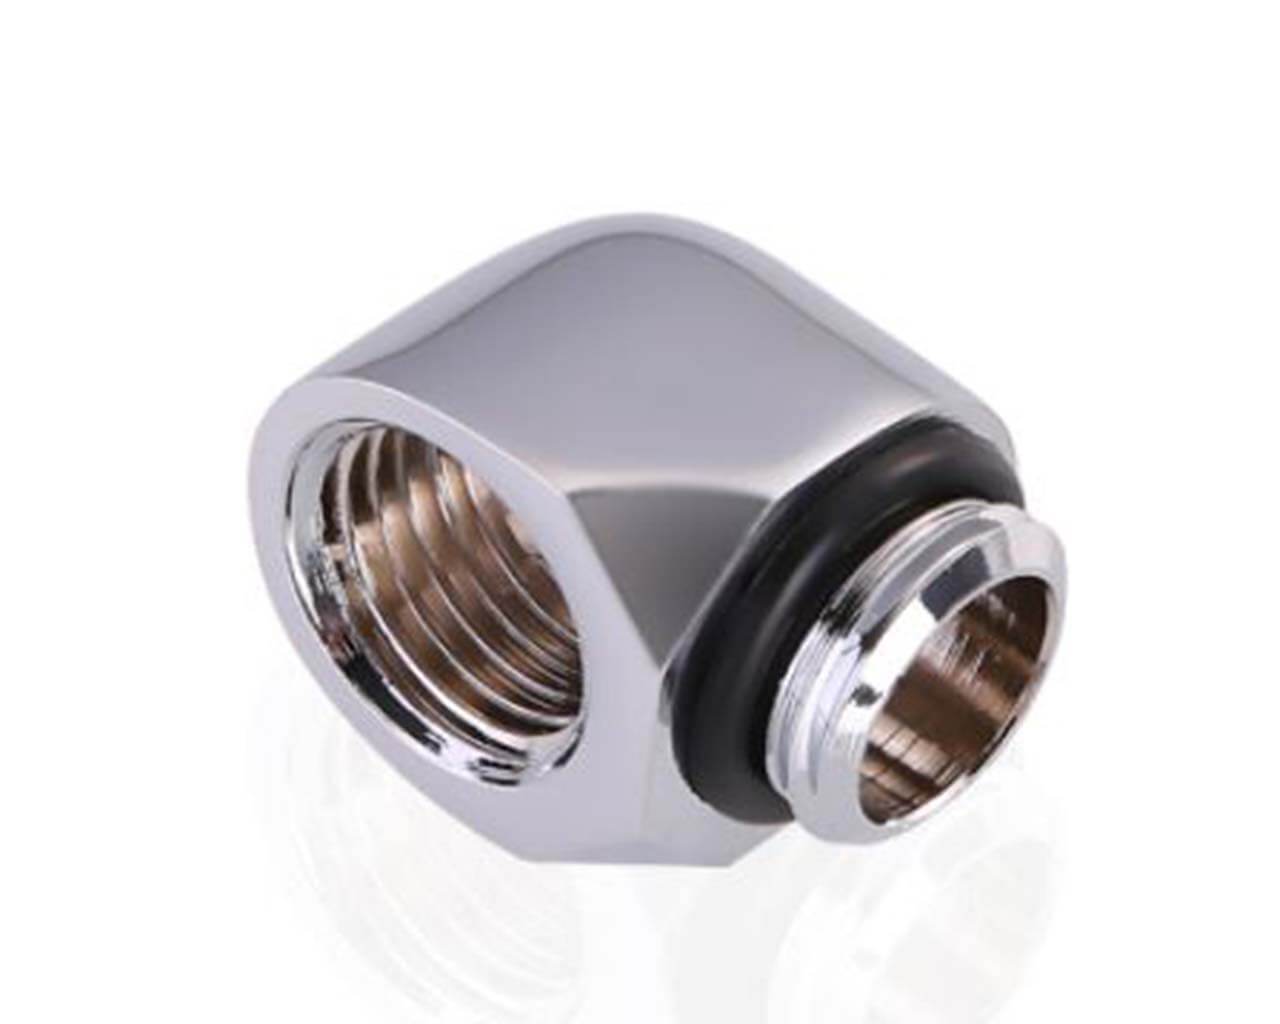 Bykski G1/4 Male to Female 90 Degree Elbow Fitting (B-D90) - PrimoChill - KEEPING IT COOL Silver